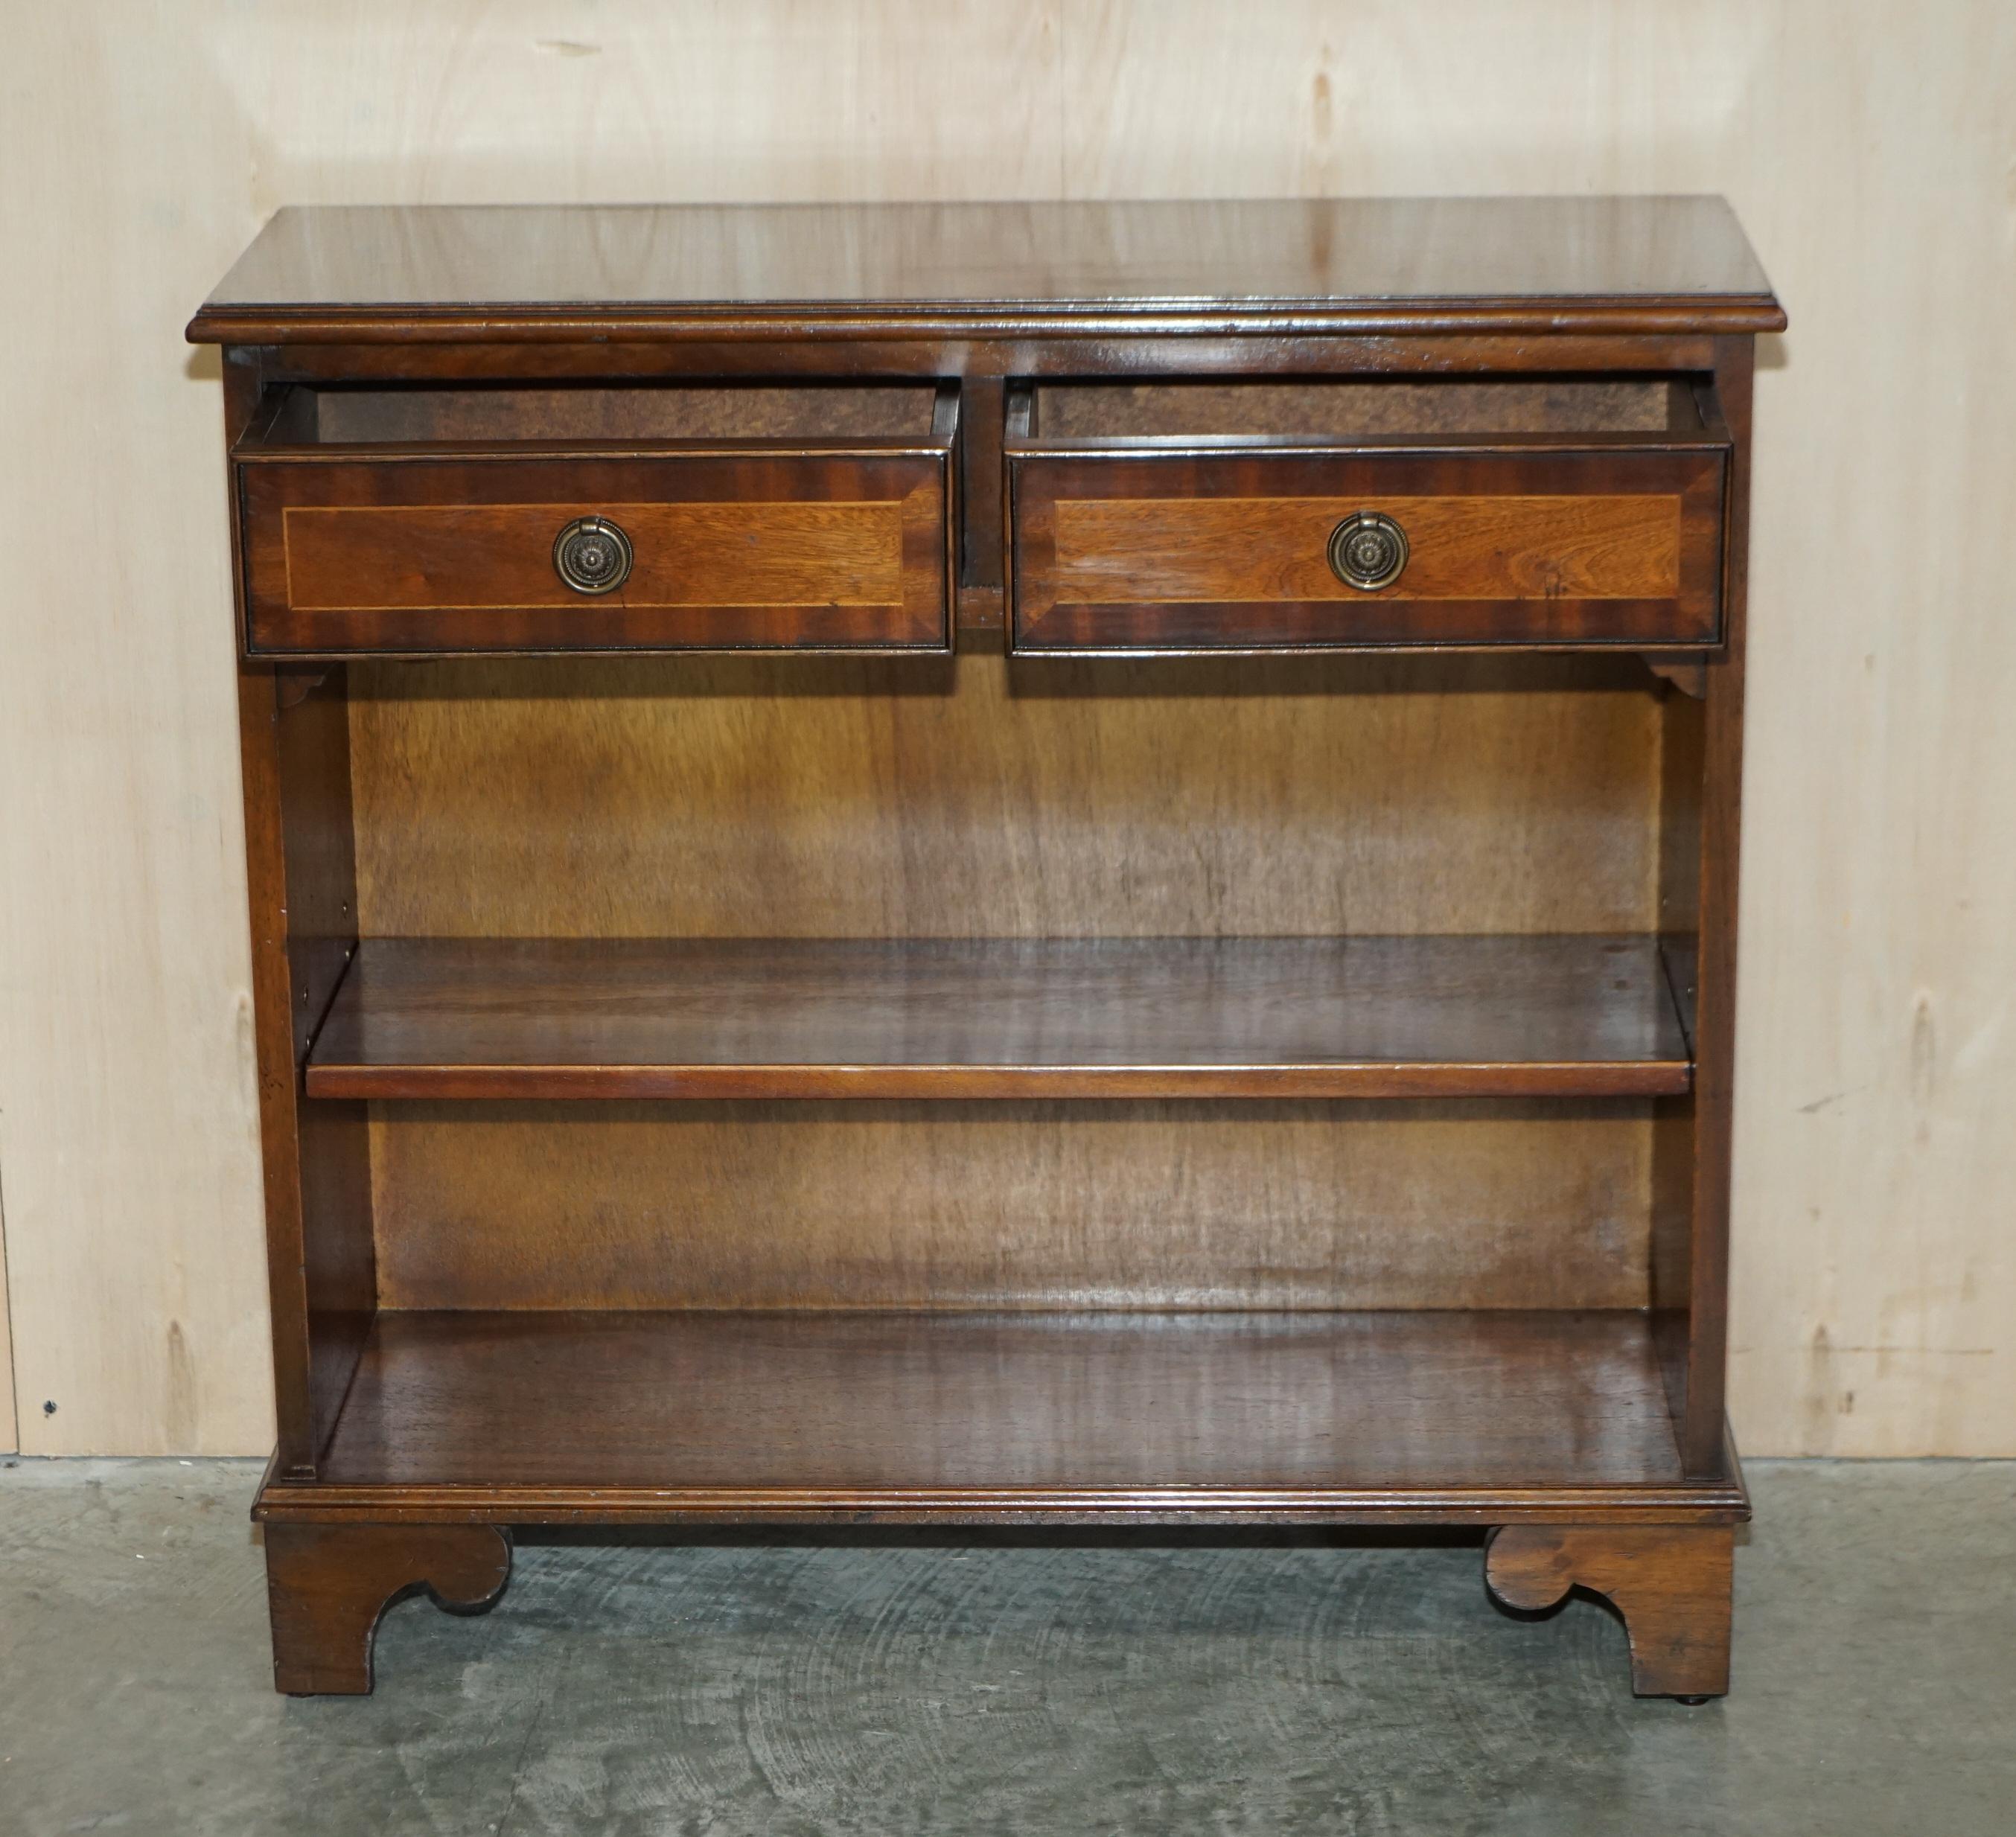 Vintage Two Drawer Bevan Funnell Flamed Hardwood Dwarf Open Library Bookcase For Sale 10